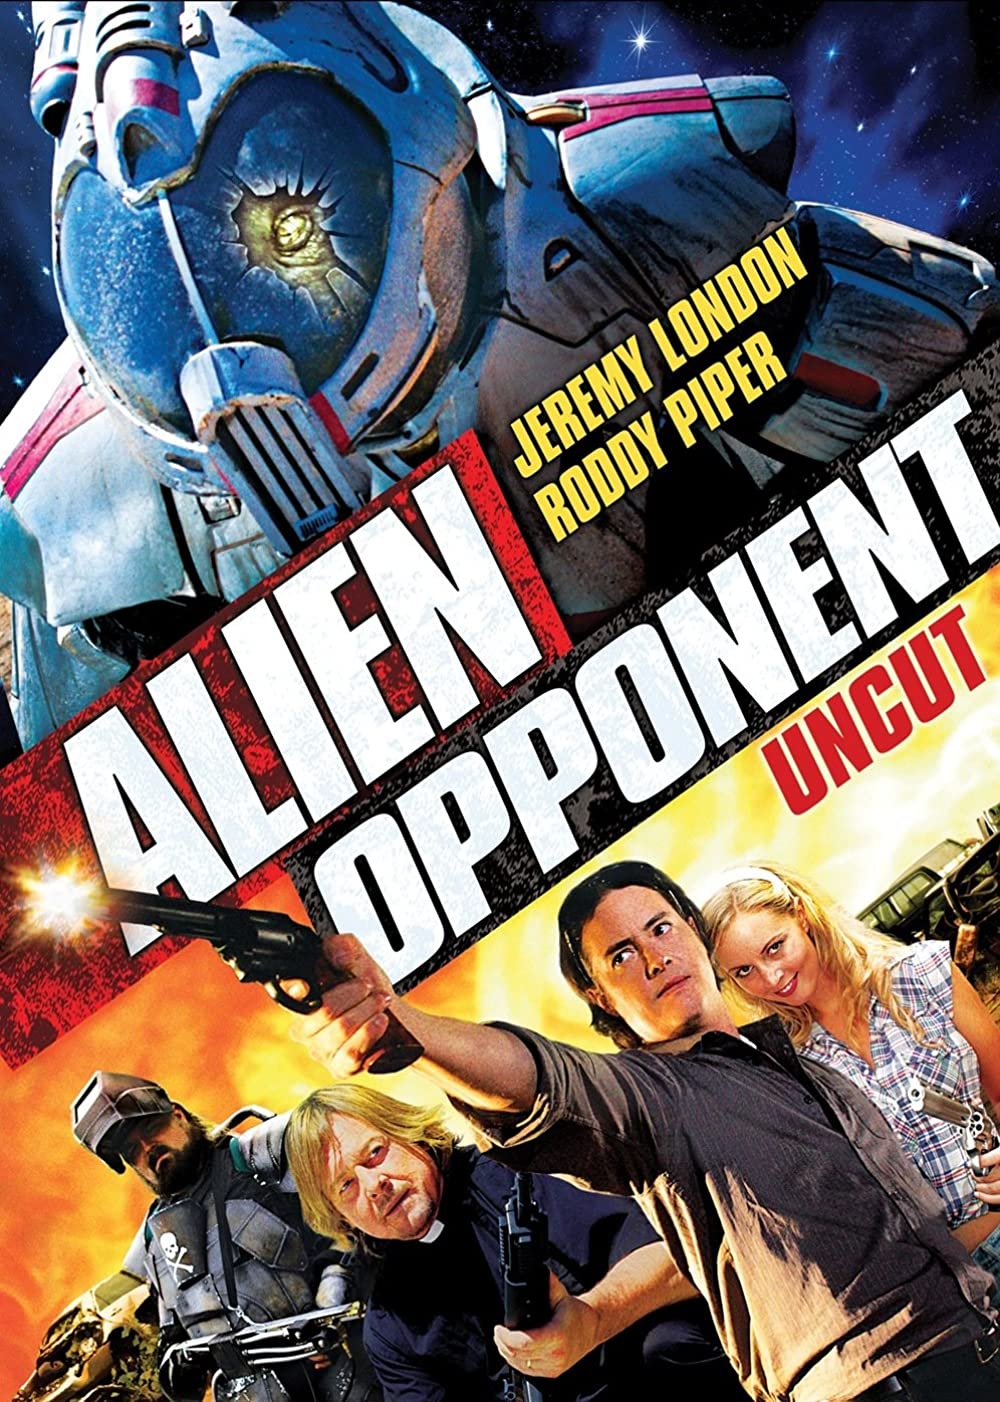 Alien Opponent 2010 Hindi ORG Dual Audio 480p UNCUT BluRay 300MB Download